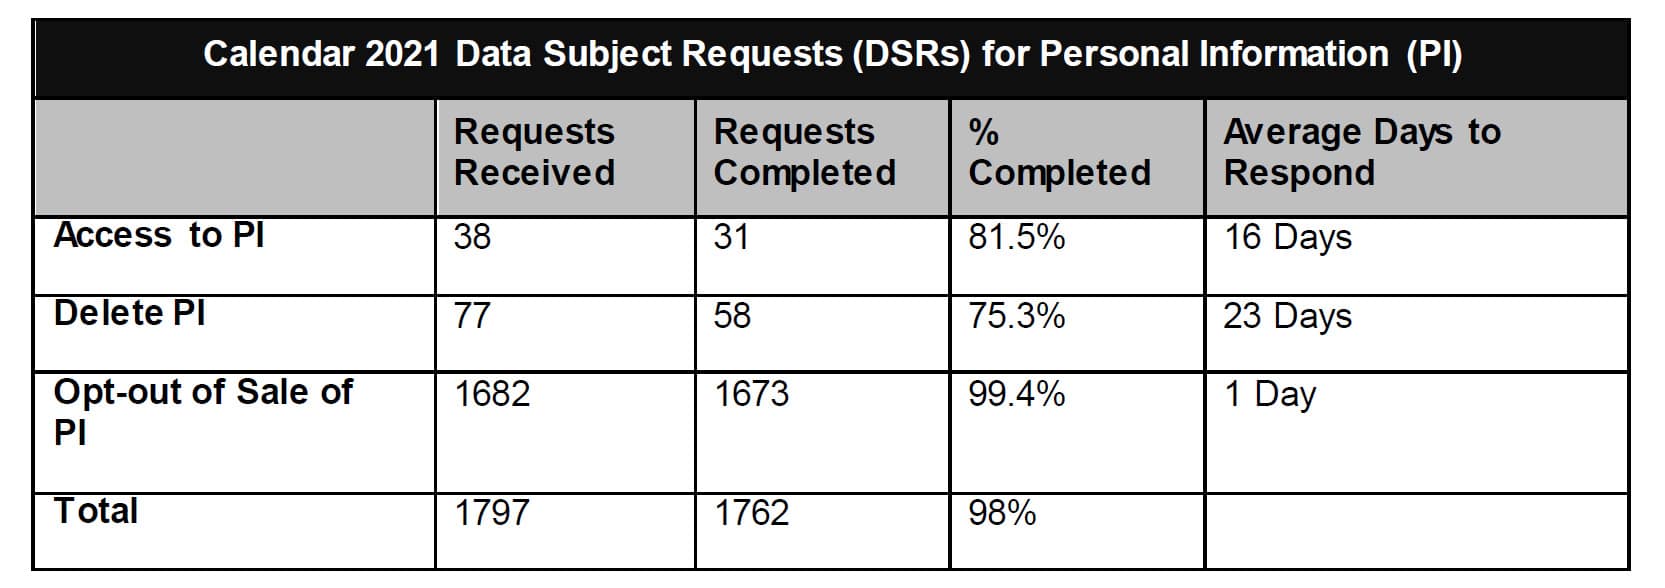 Calendar 2021 Data Subjects Requests (DSRs) for Personal Information (PI)